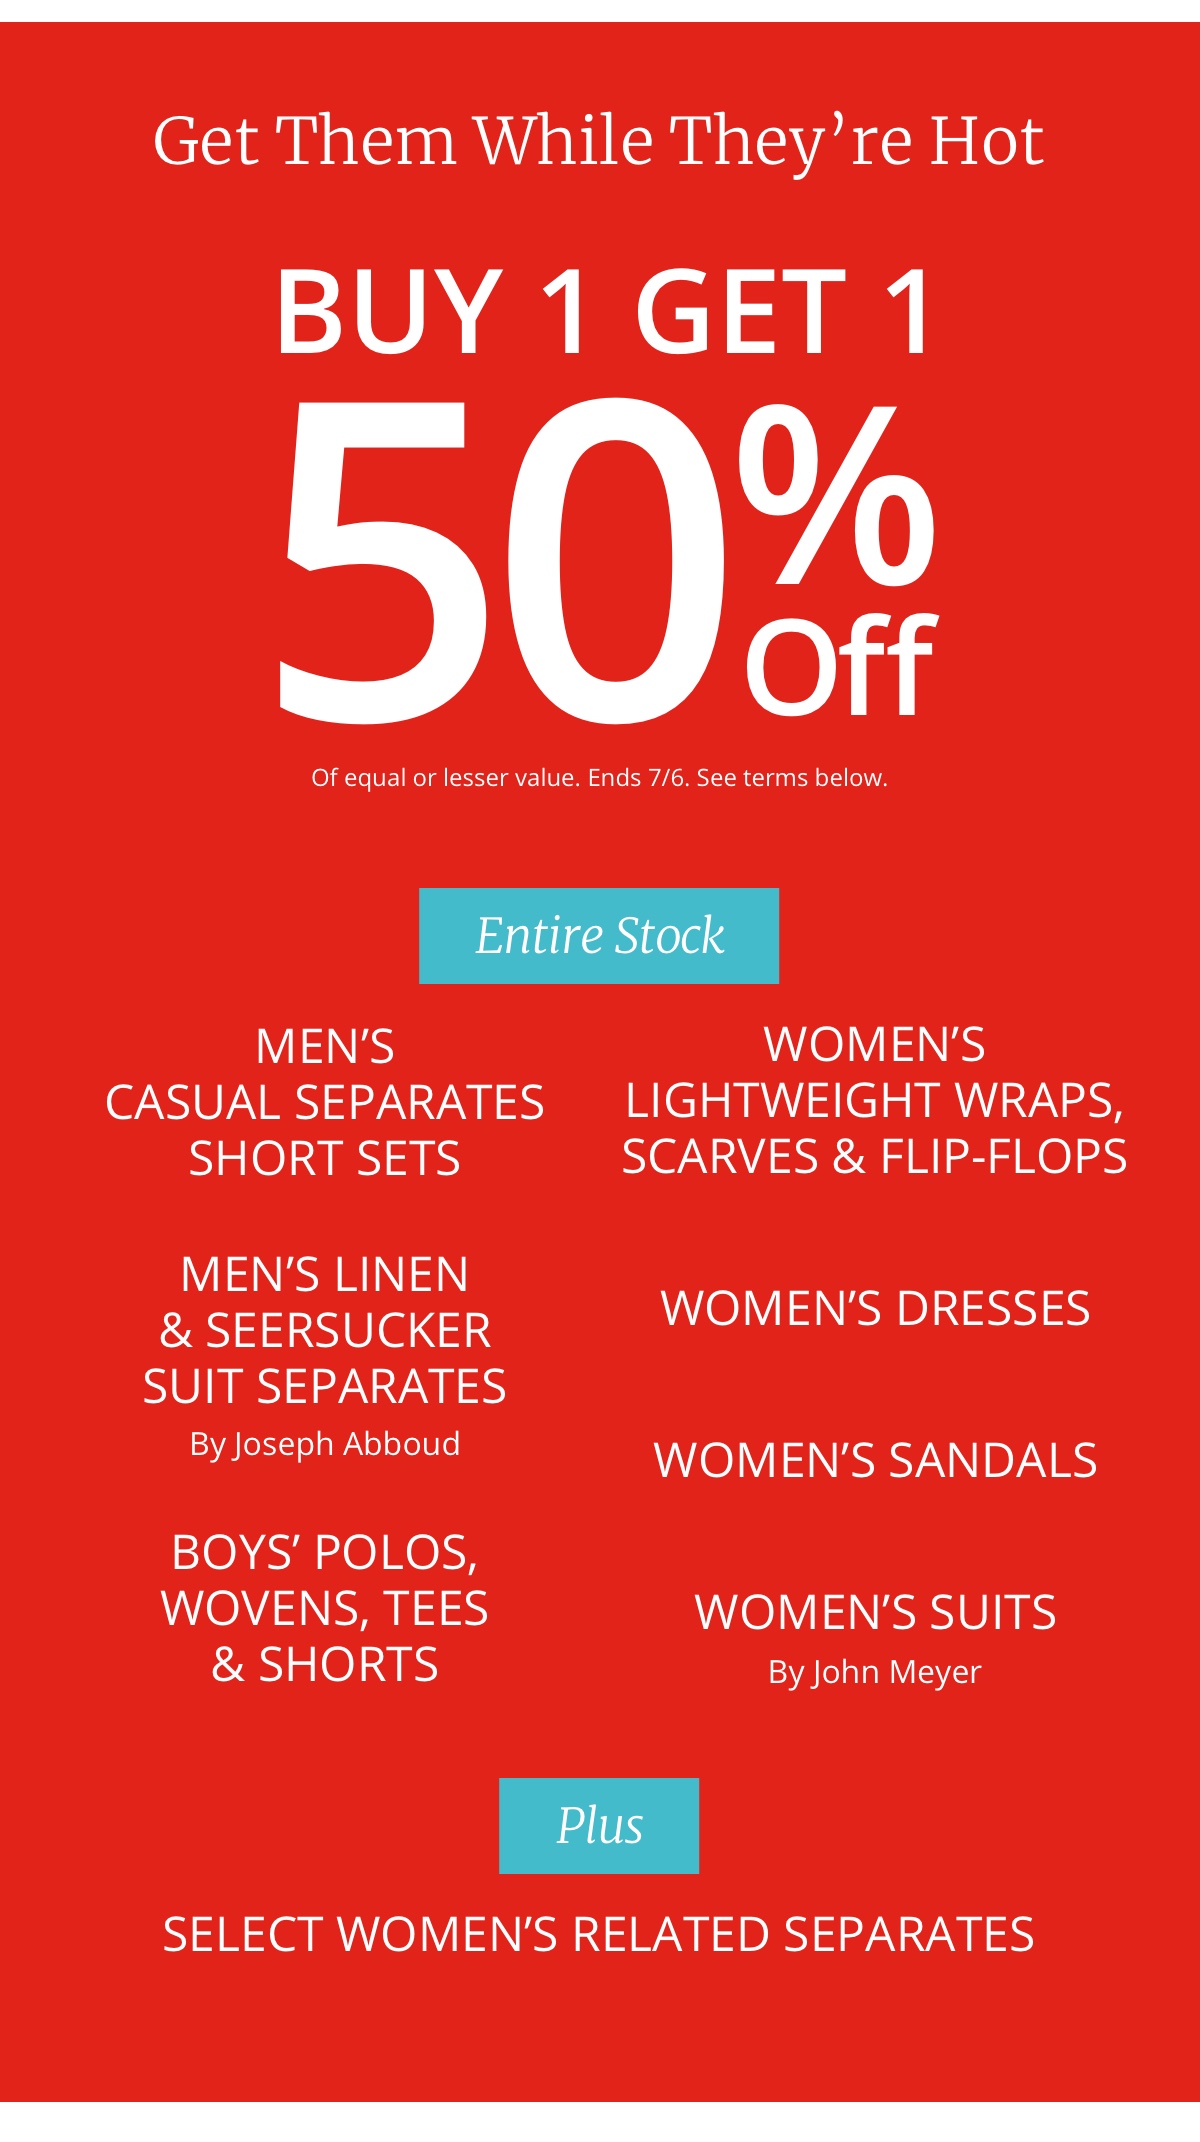 Get Them While They re Hot|Buy 1 Get 1|50% Off|Of equal or lesser value|See terms below|Entire Stock|Mens|Casual Separates|Short Sets|Mens Linen|and Seersucker|Suit Separates| By Joseph Abboud|Boys Polos,|Woven, Tees|and Shorts|Womens|Lightweight Wraps,|Scarves and Flip-Flops|Women s Dresses|Women s Sandals|Womens Suits By John Meyer|Plus|Select Womens Related Separates